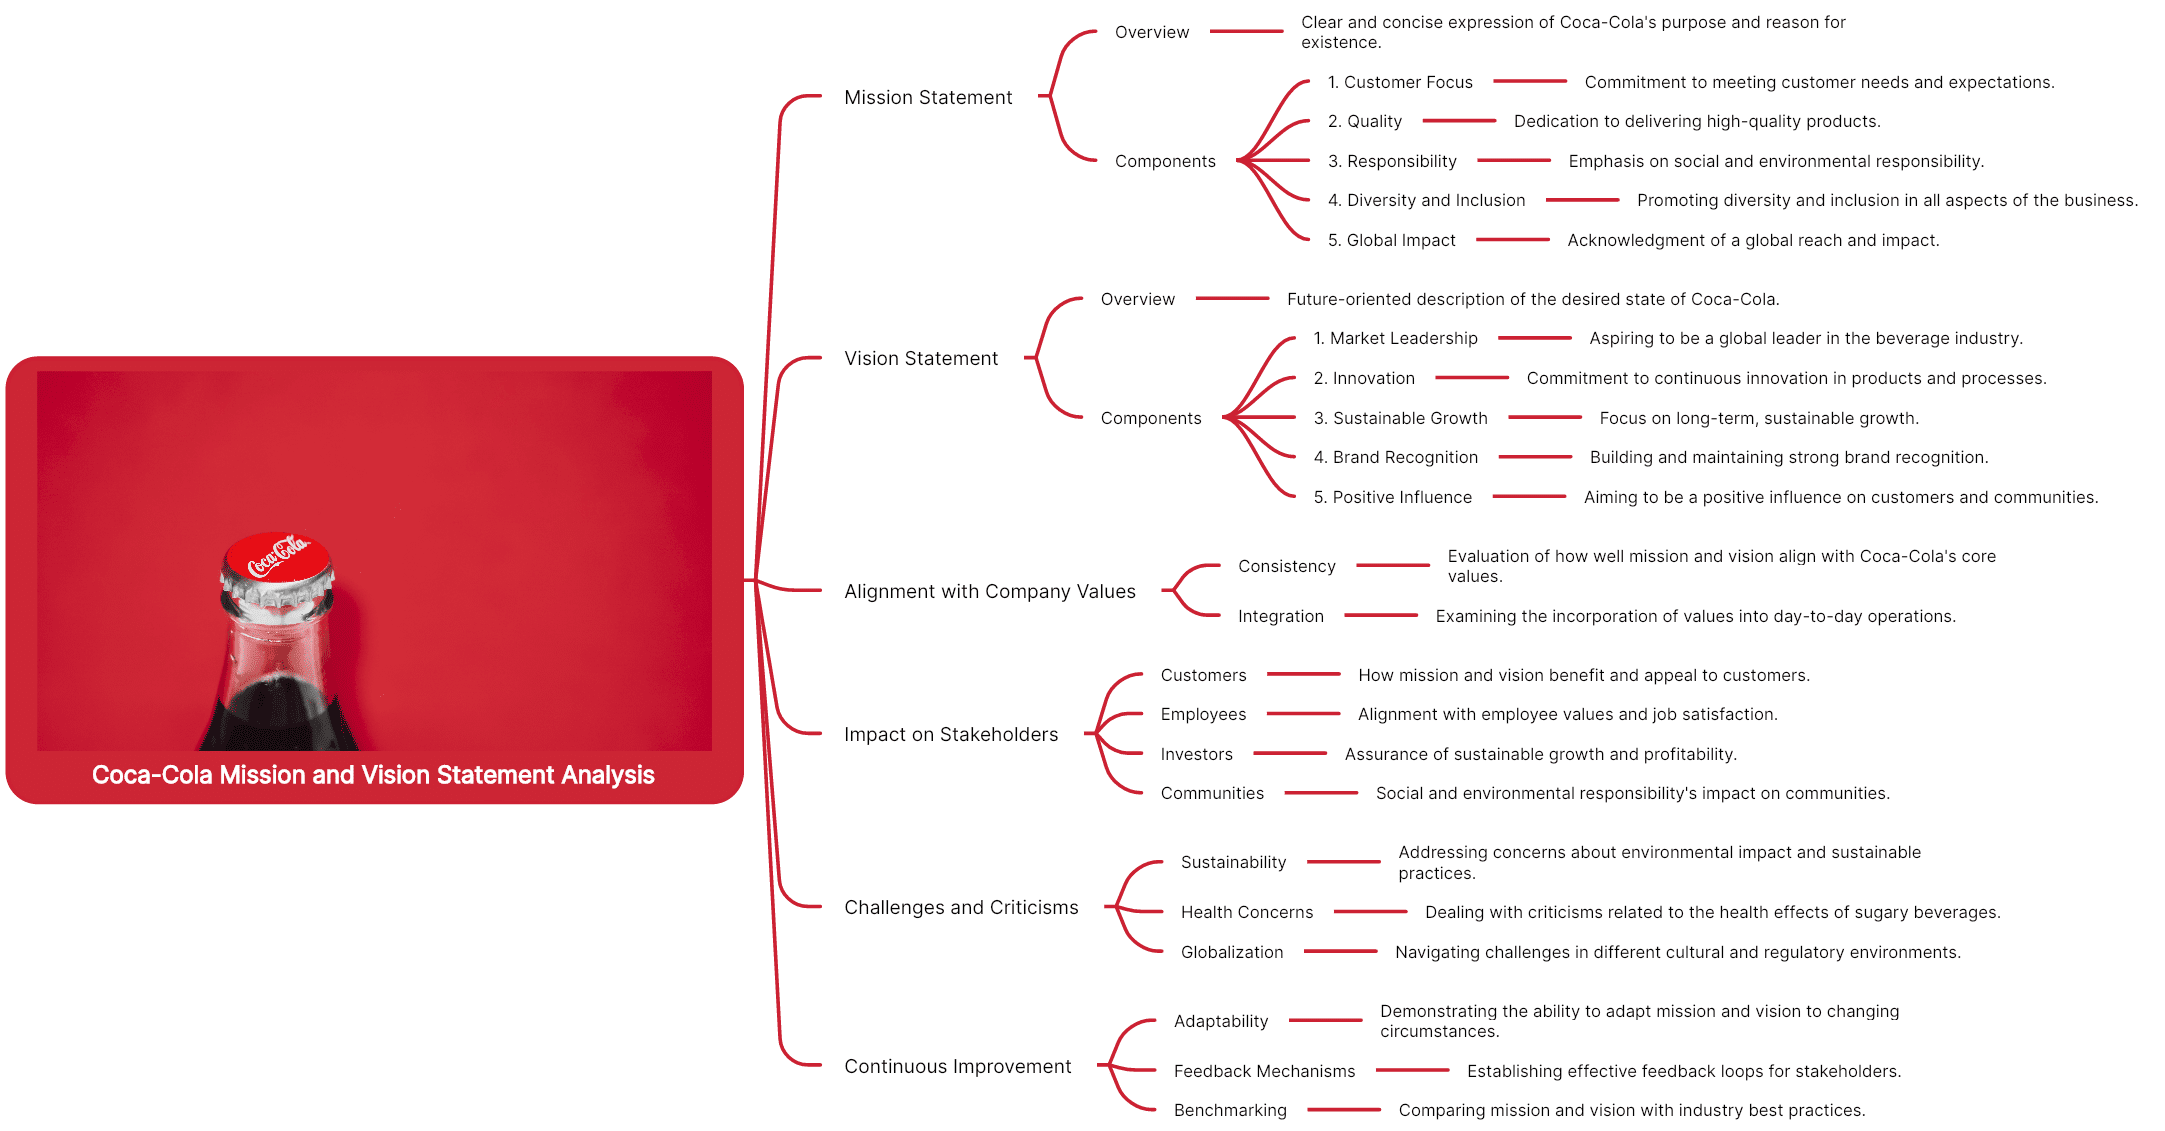 Coca-Cola Mission and Vision Statement Analysis Mind Map